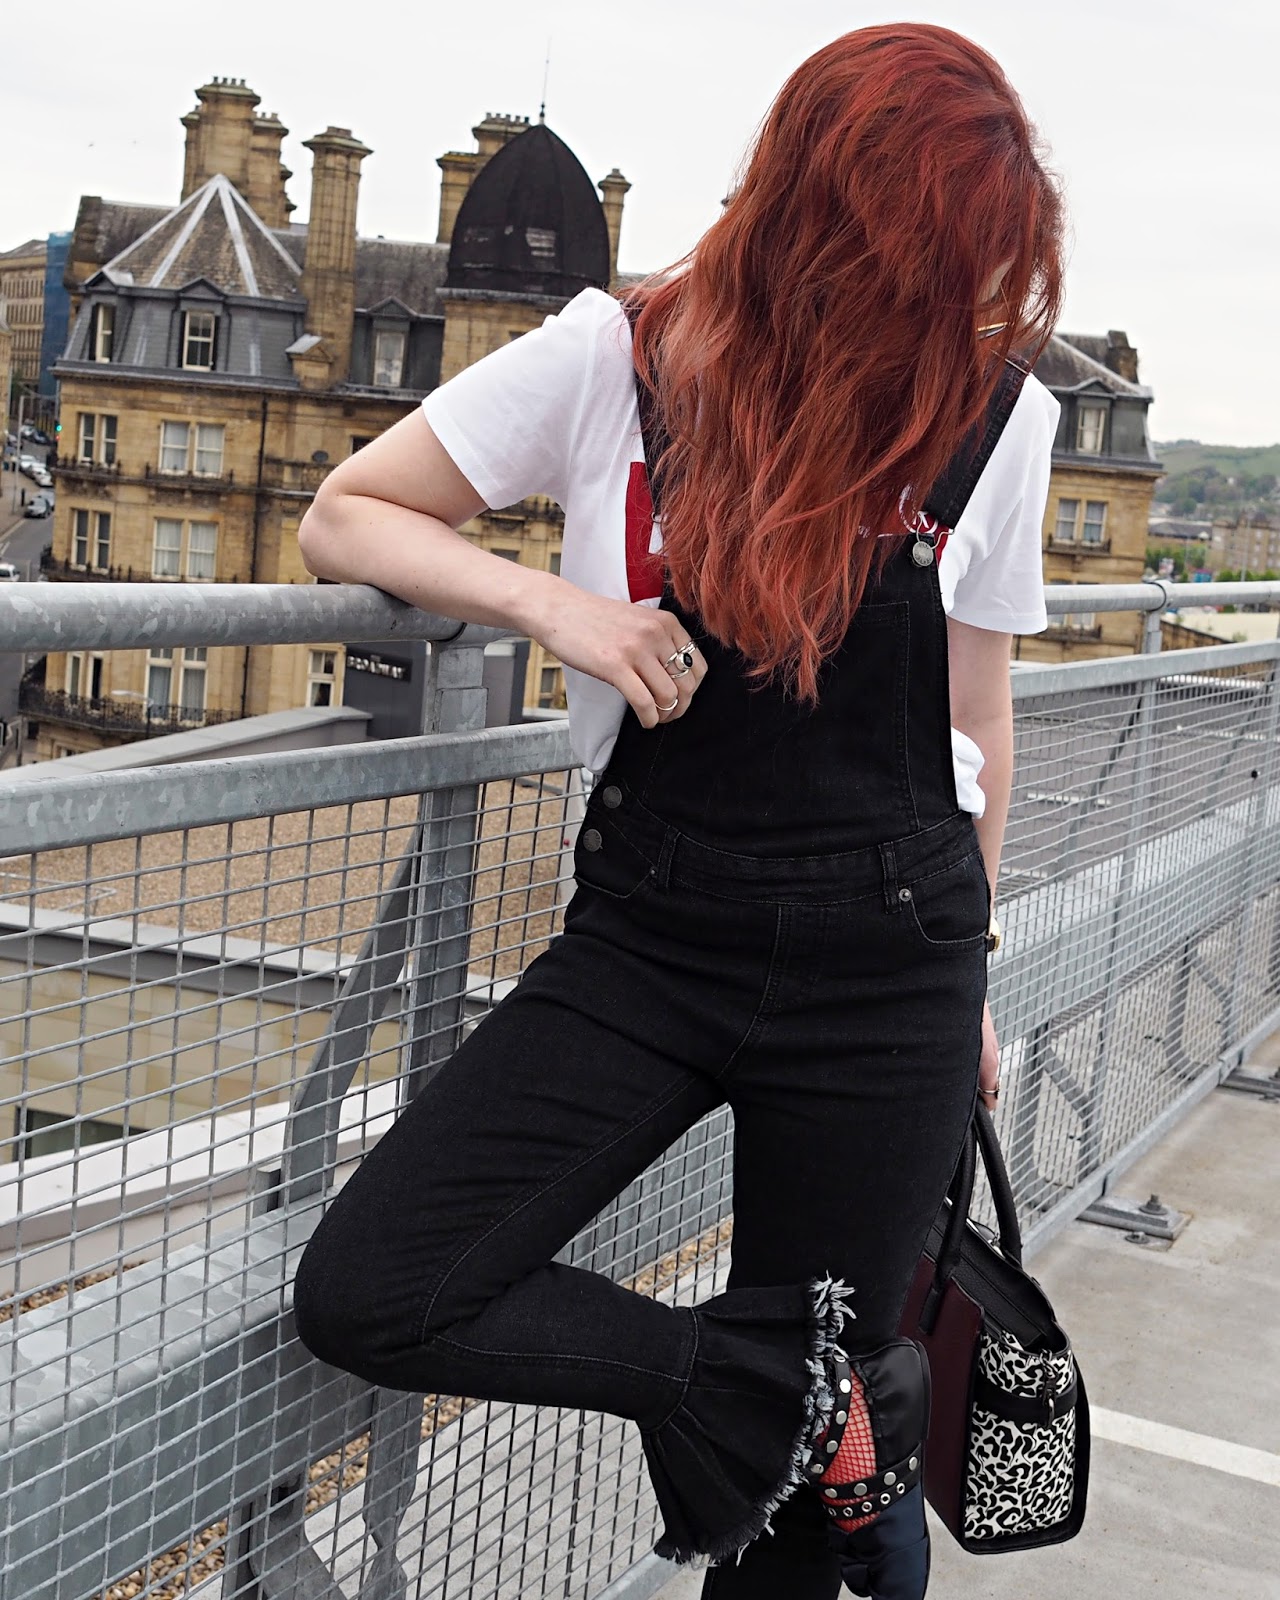 red hair and dungarees